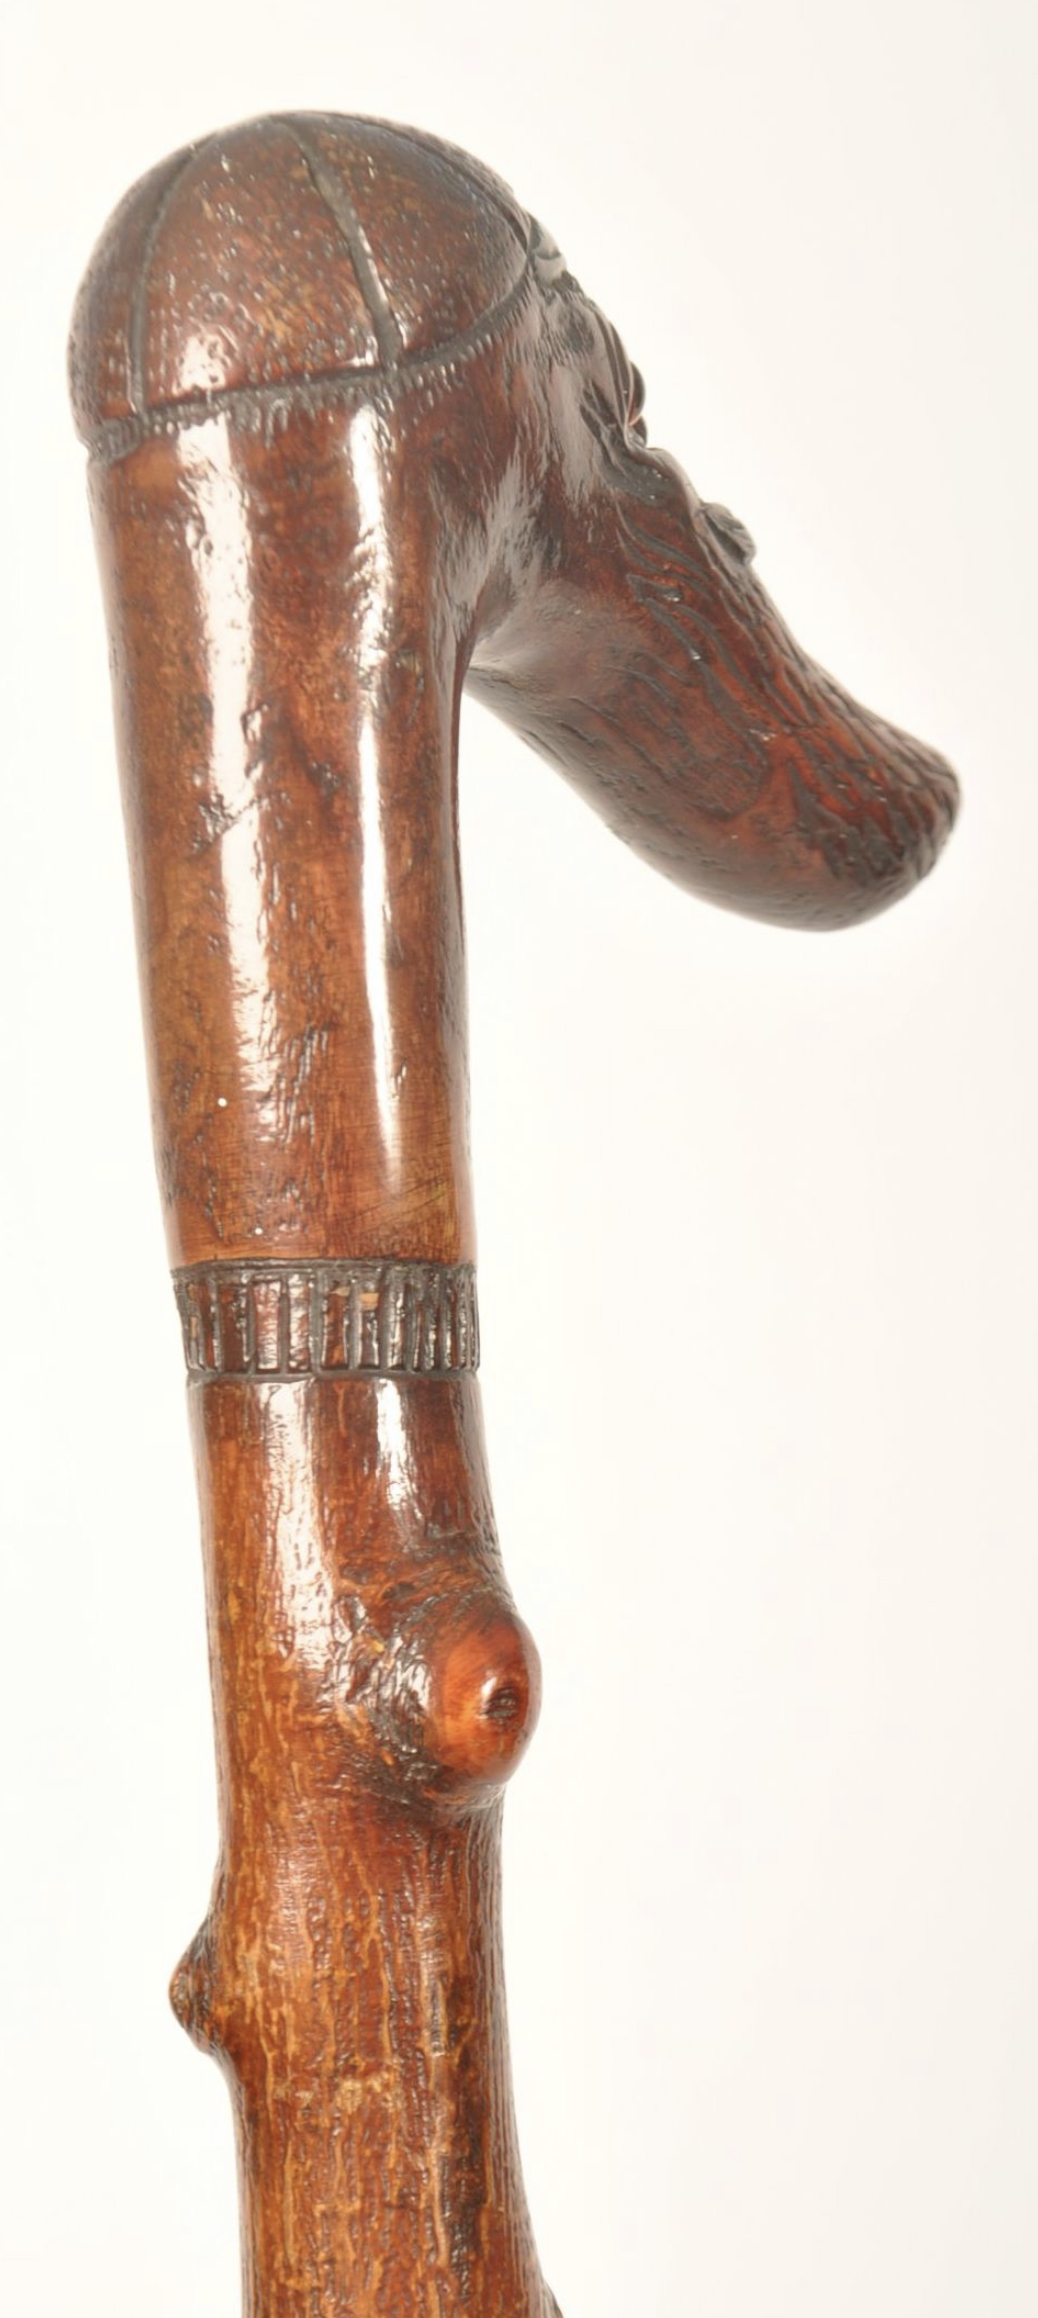 Cricketing interest walking stick with the head of WG grace - Image 5 of 5